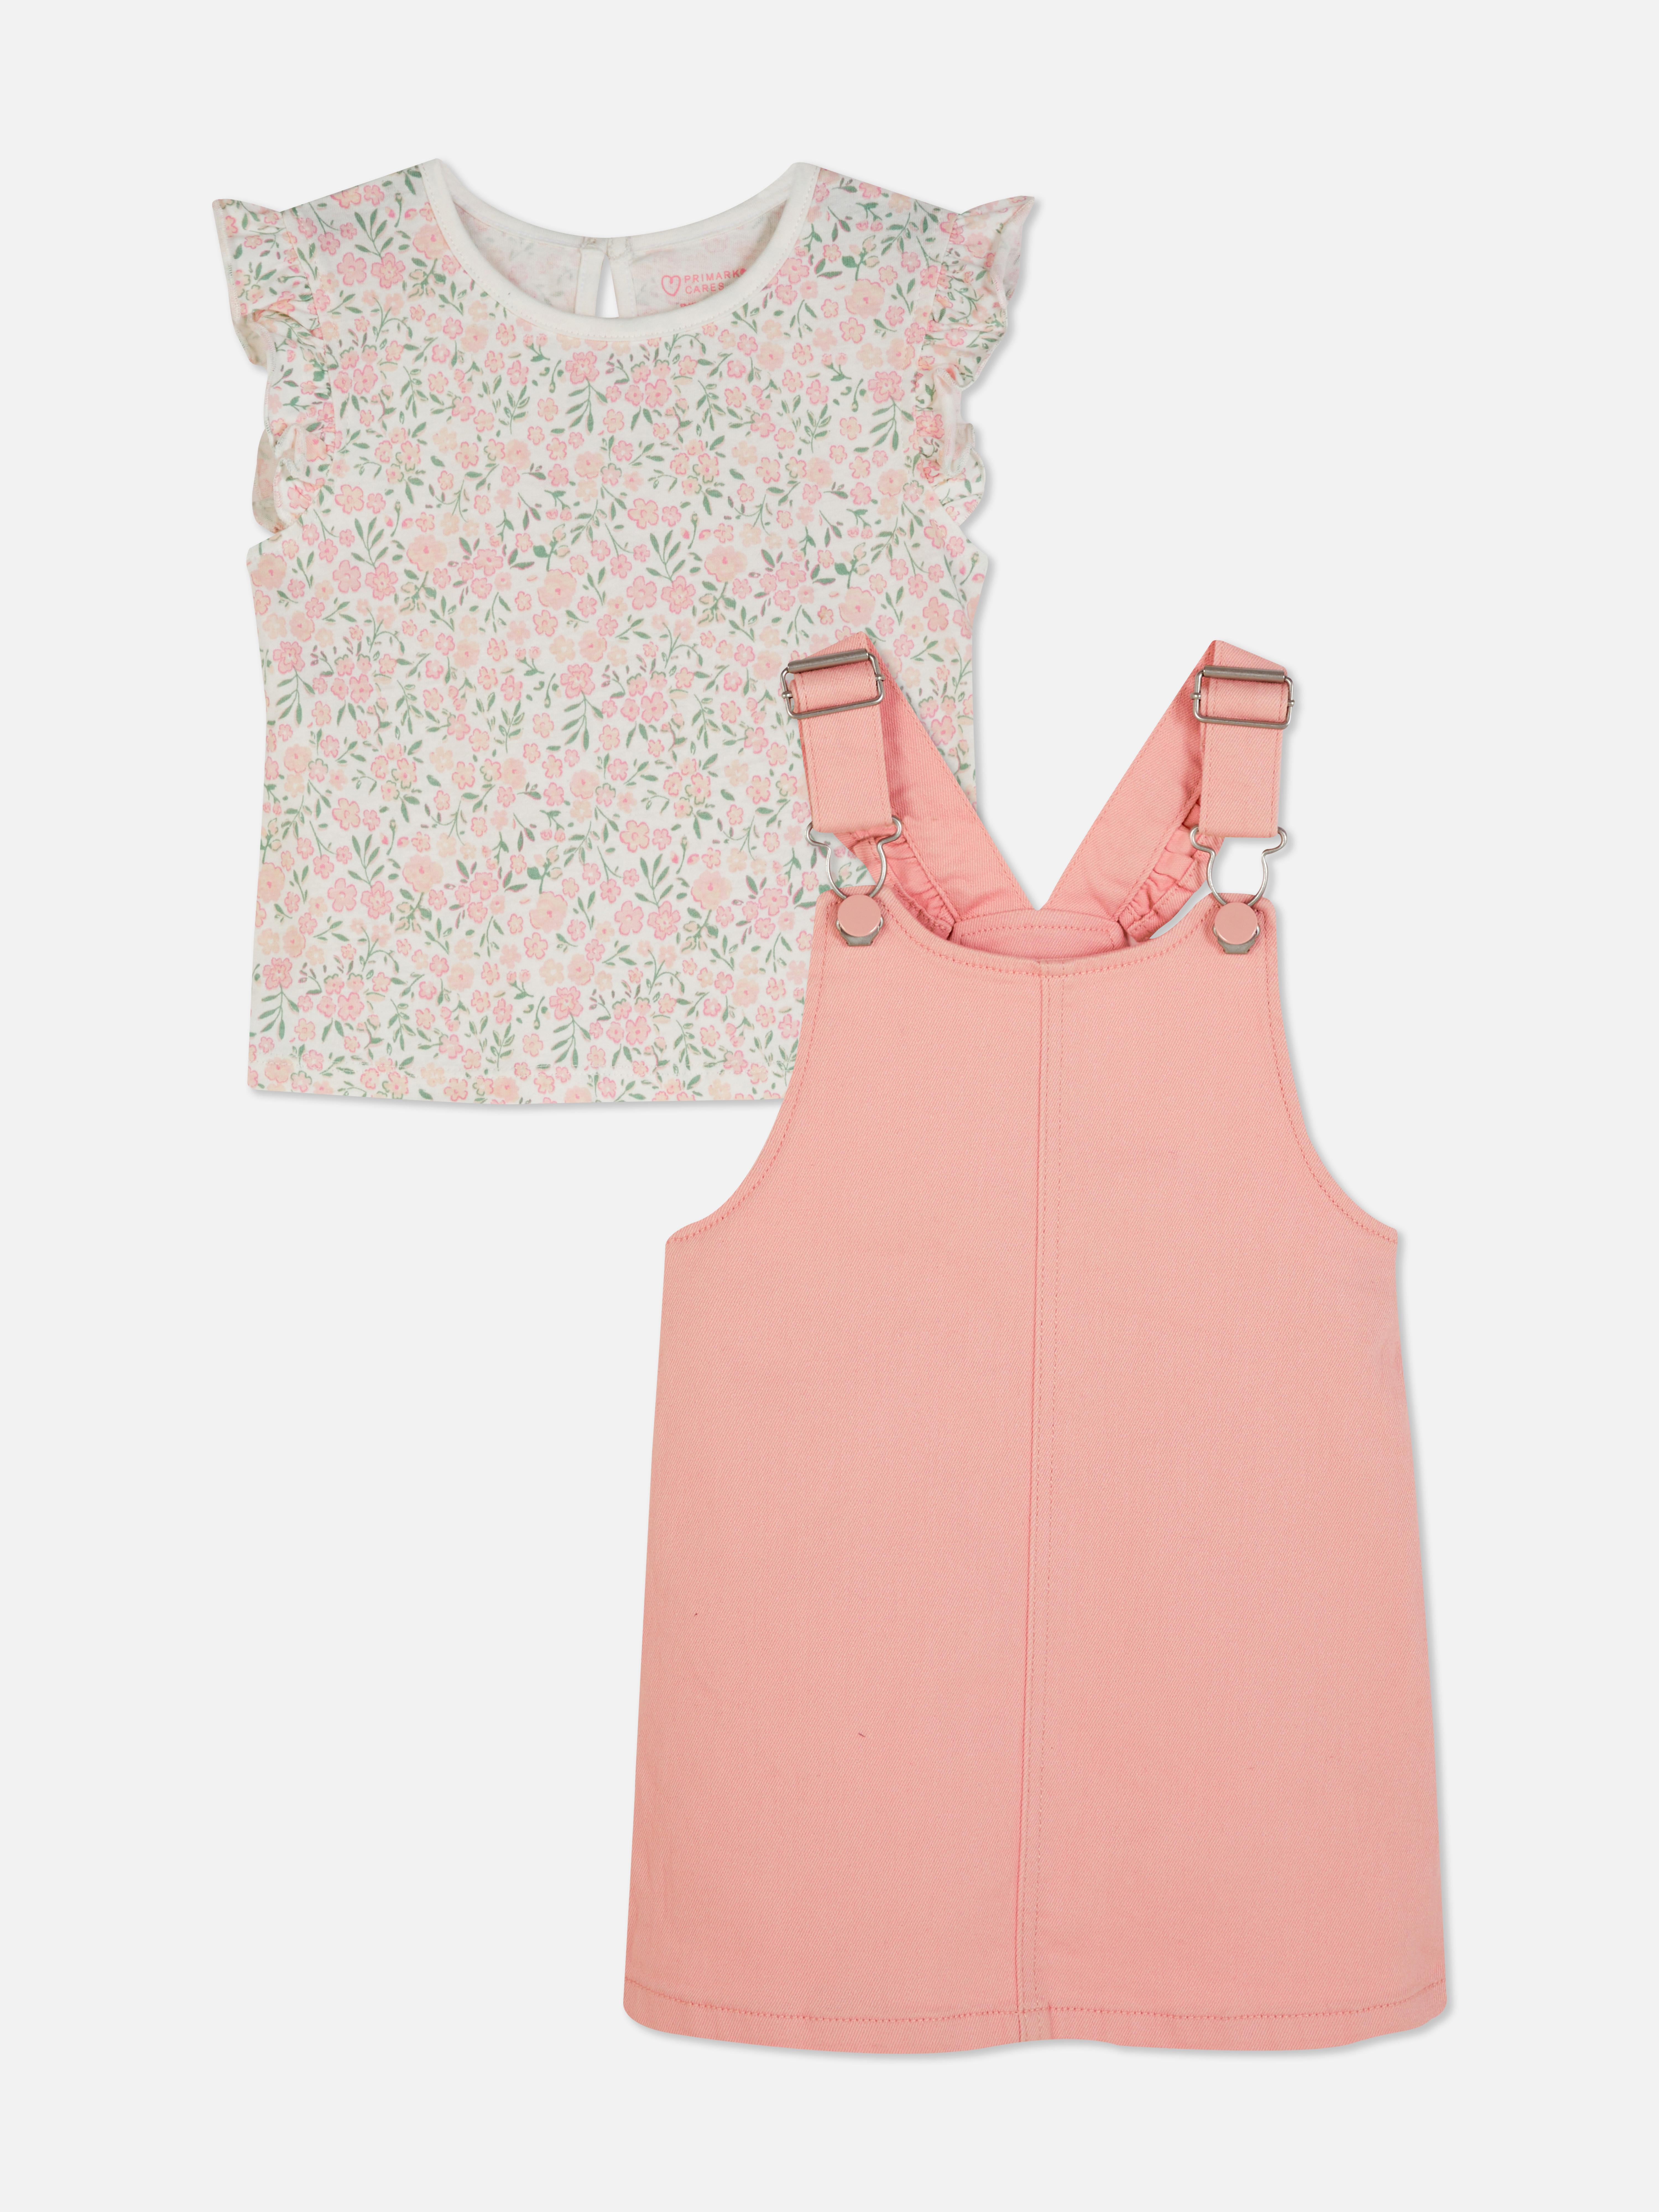 Floral Top and Pinafore Set